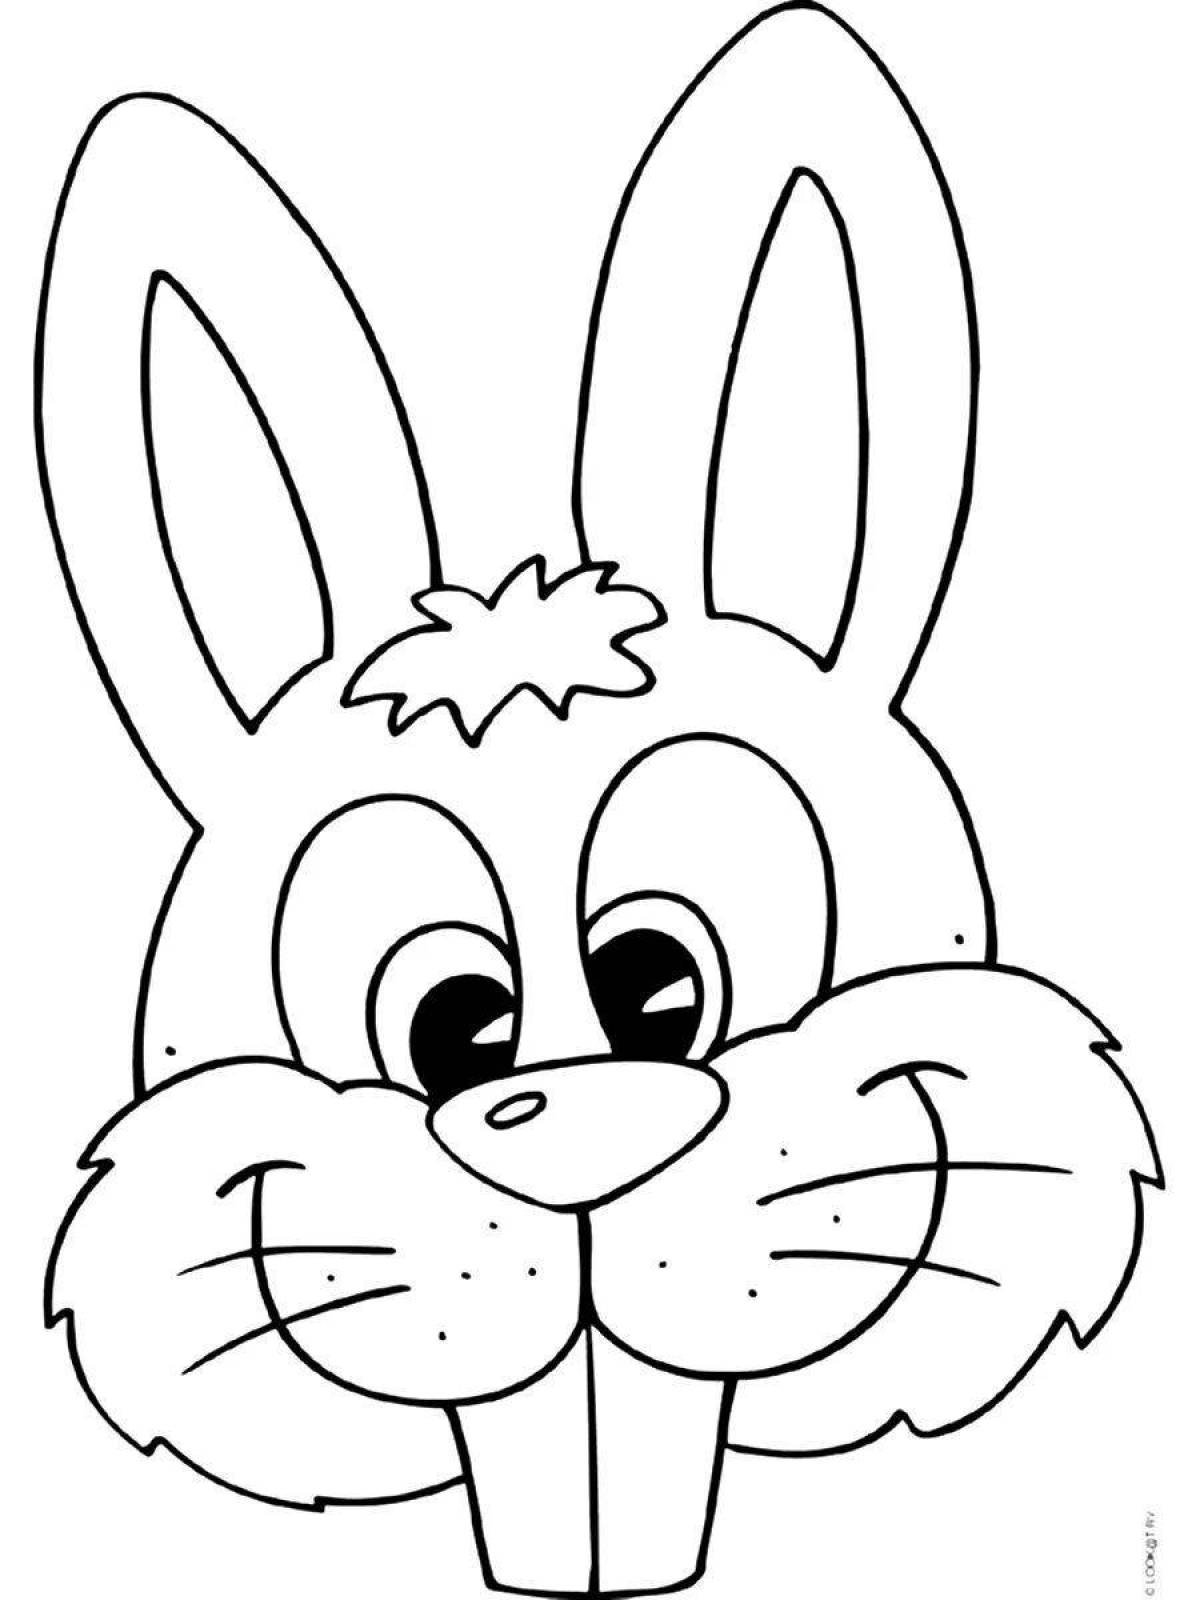 Sweet rabbit mask coloring page